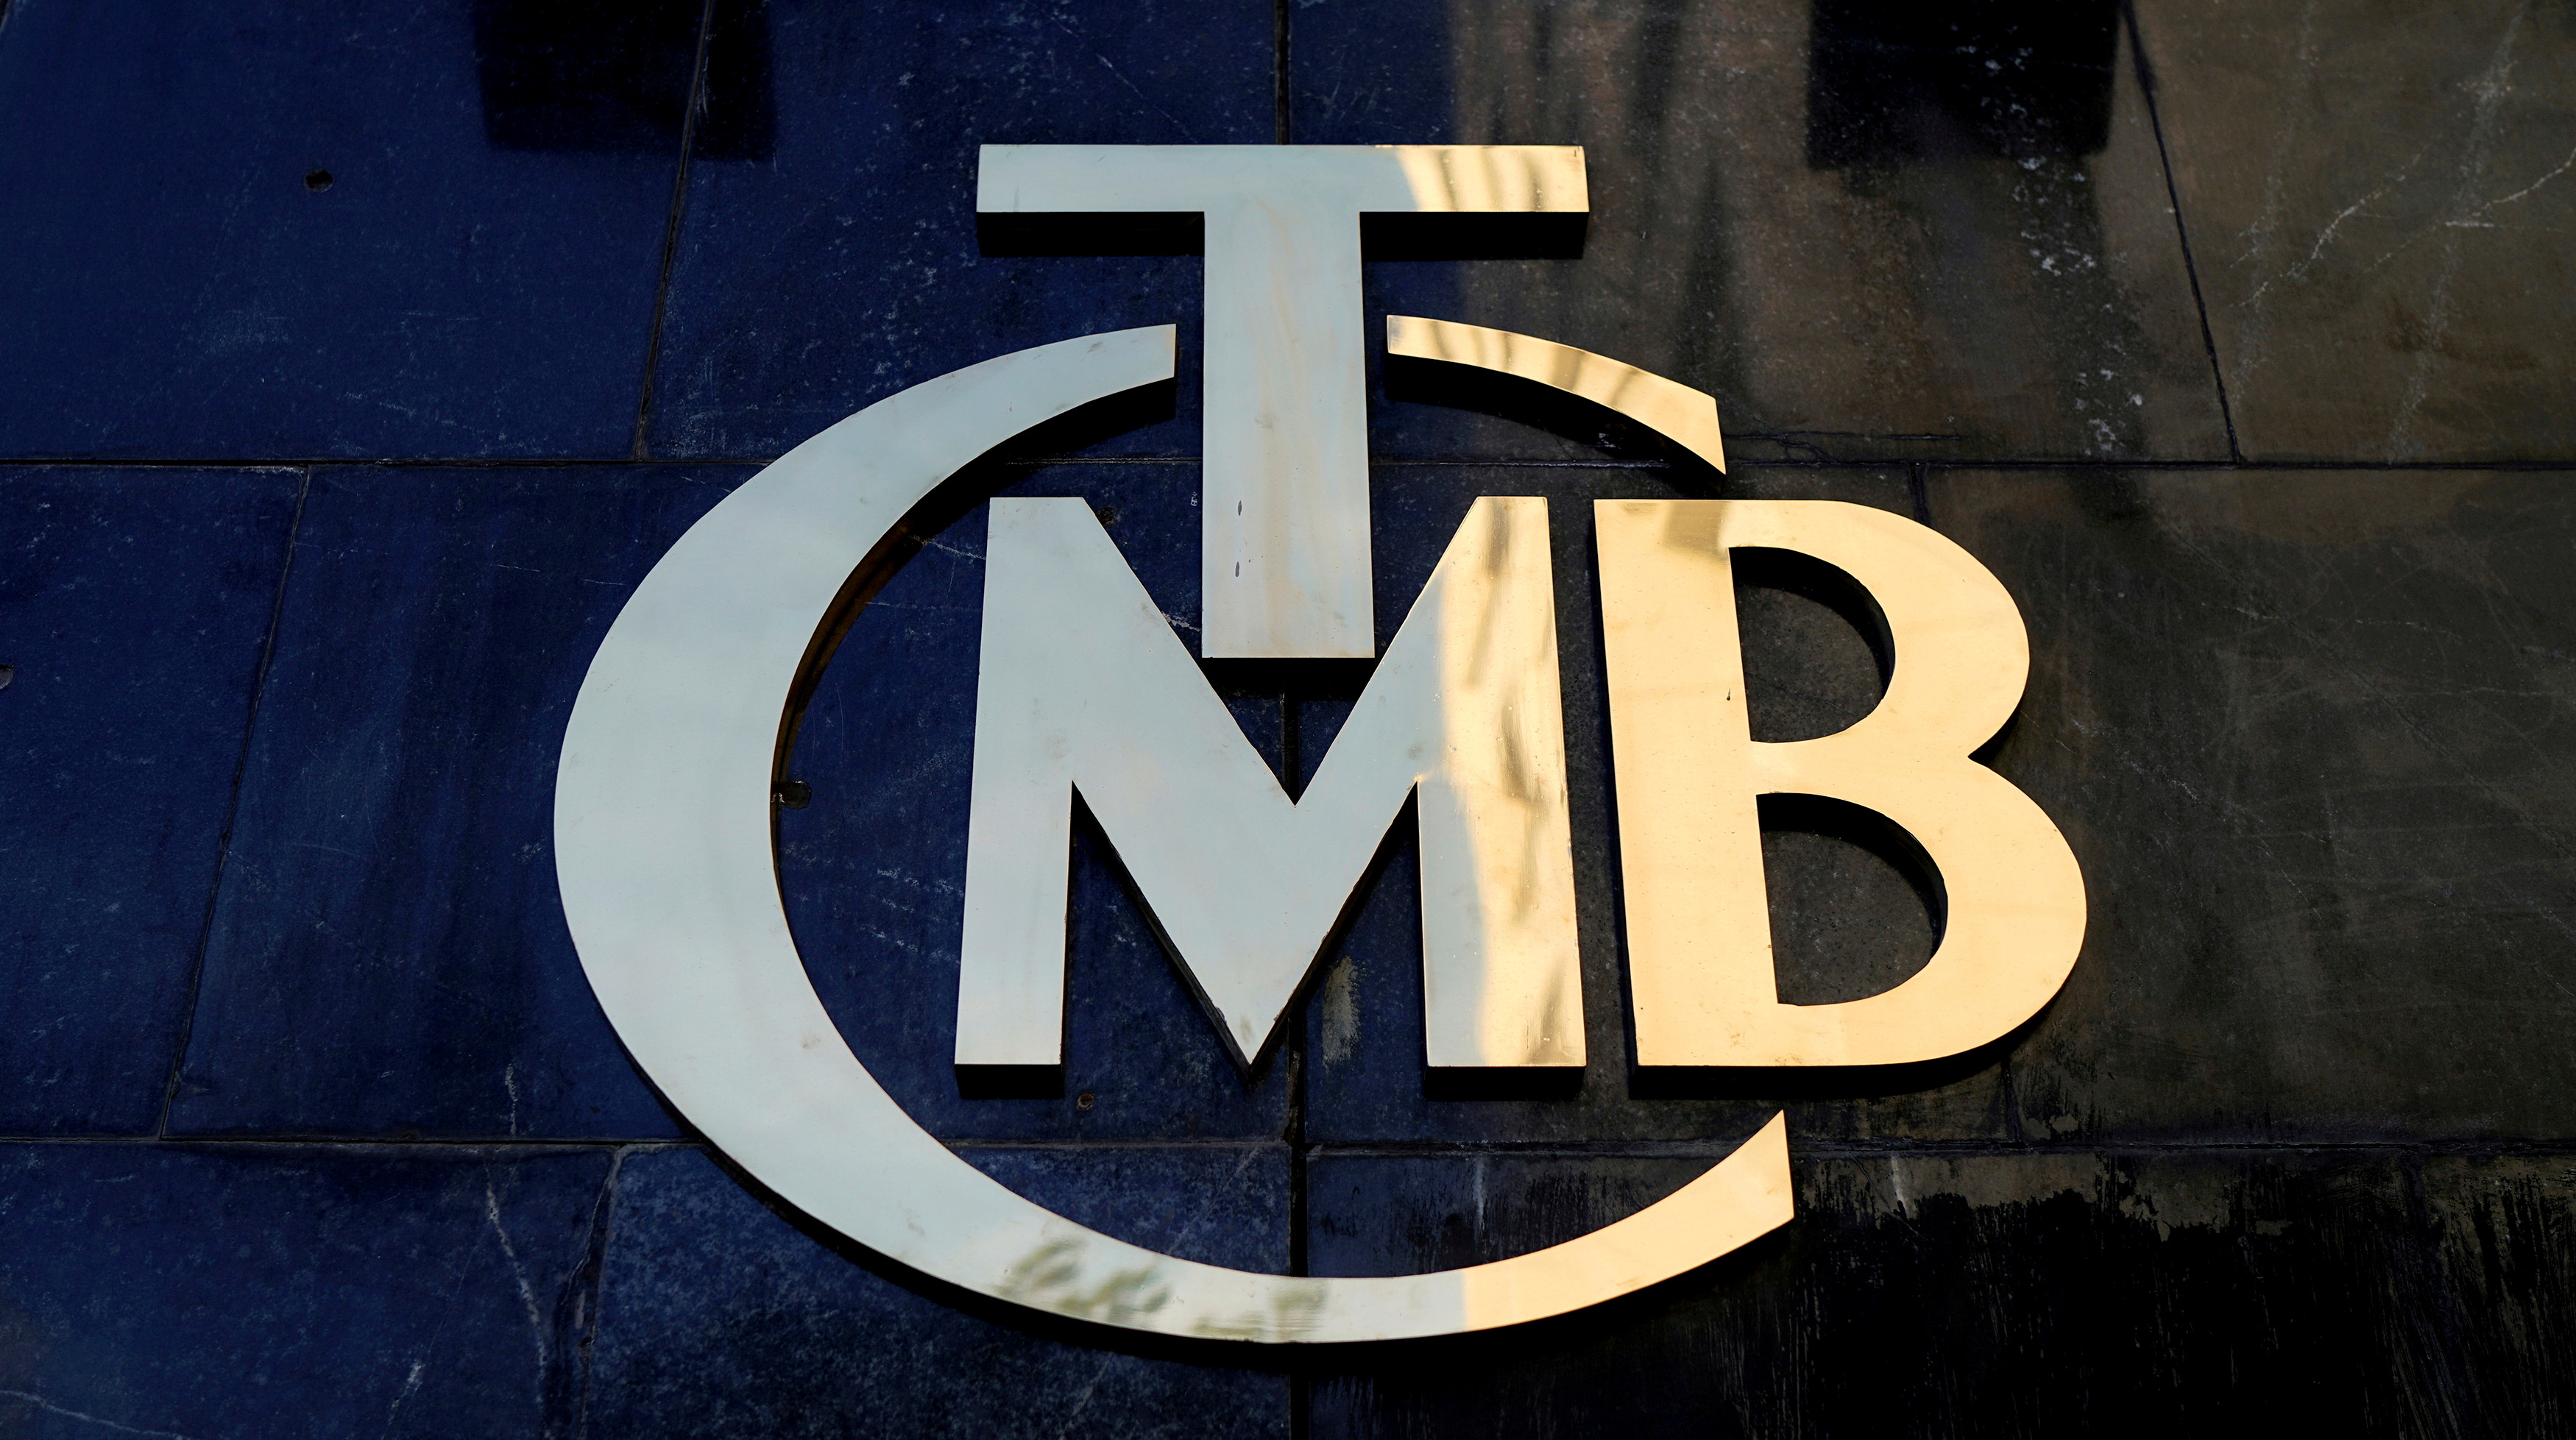 A logo of Turkey's Central Bank is pictured at the entrance of the bank's headquarters in Ankara